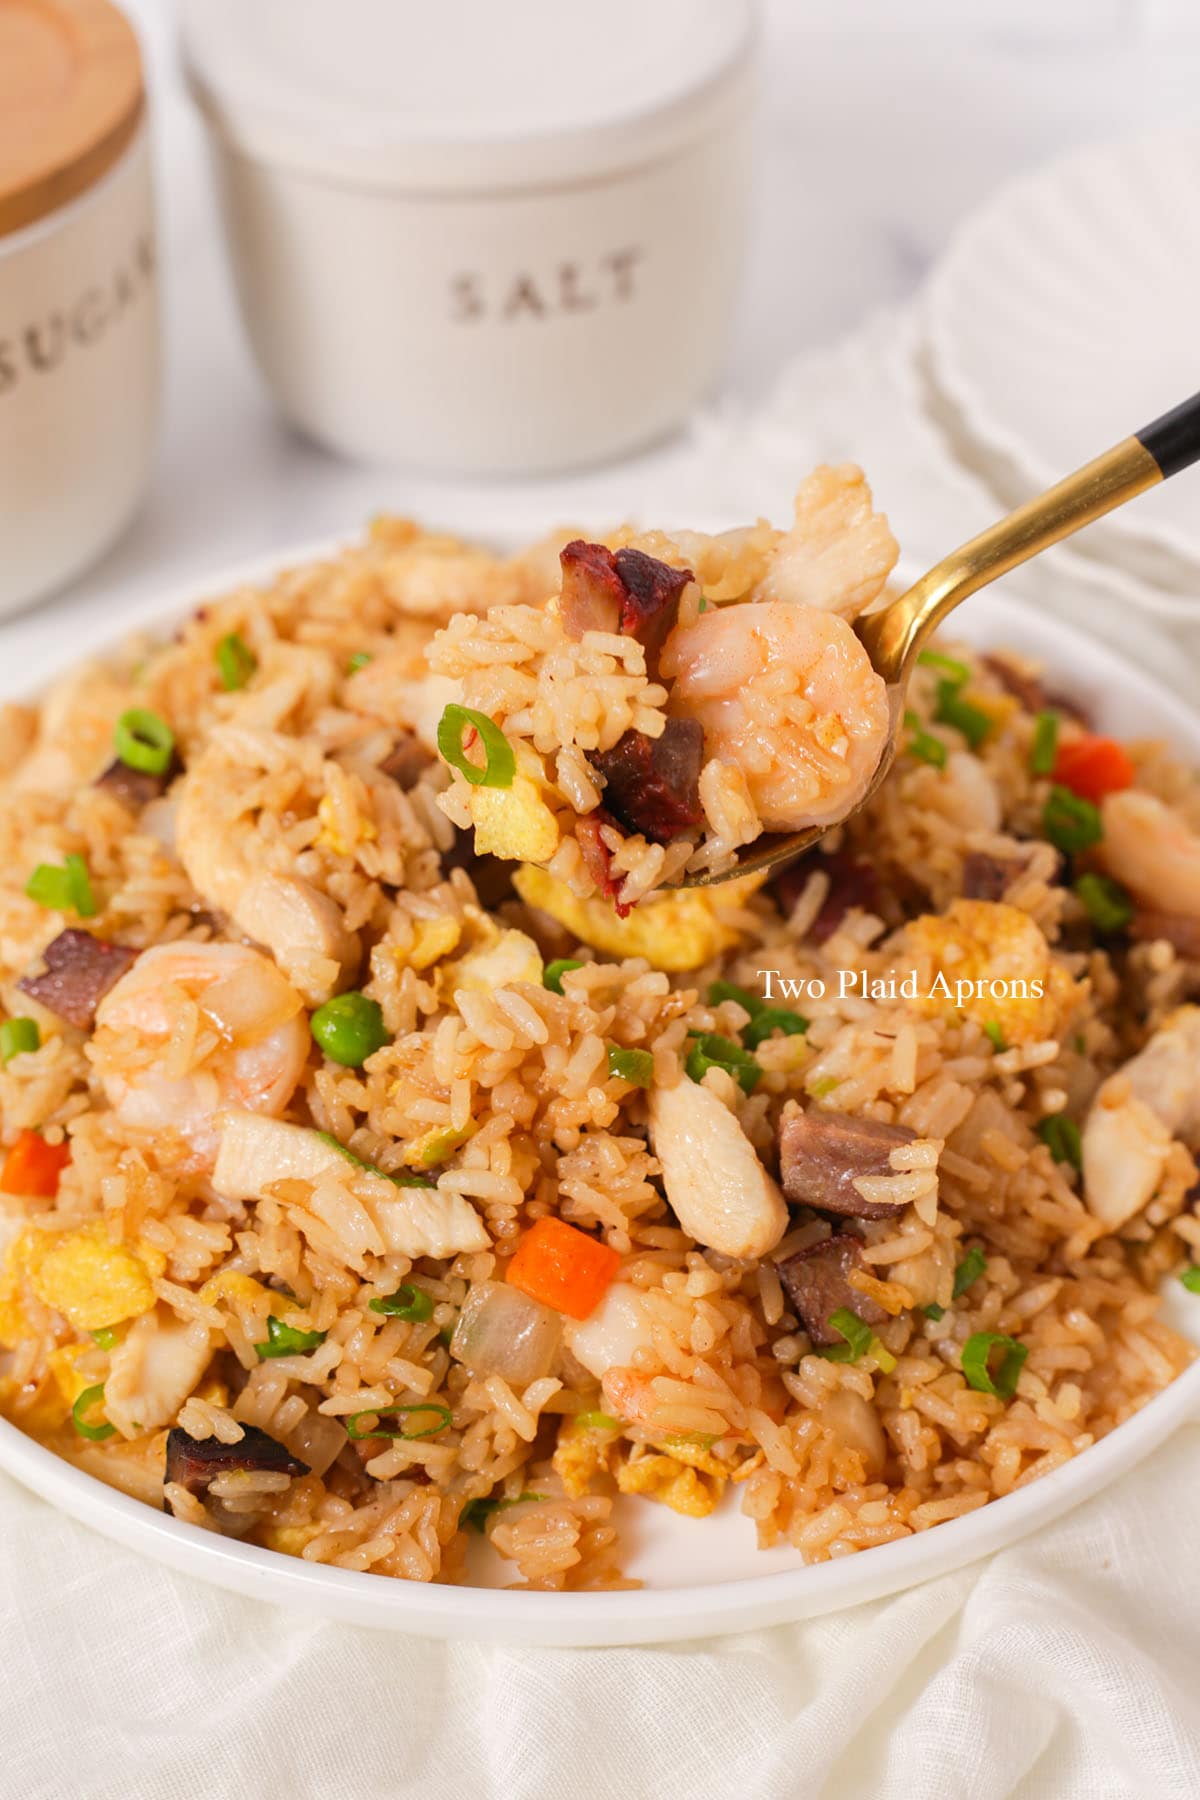 Spoonful of house special fried rice.